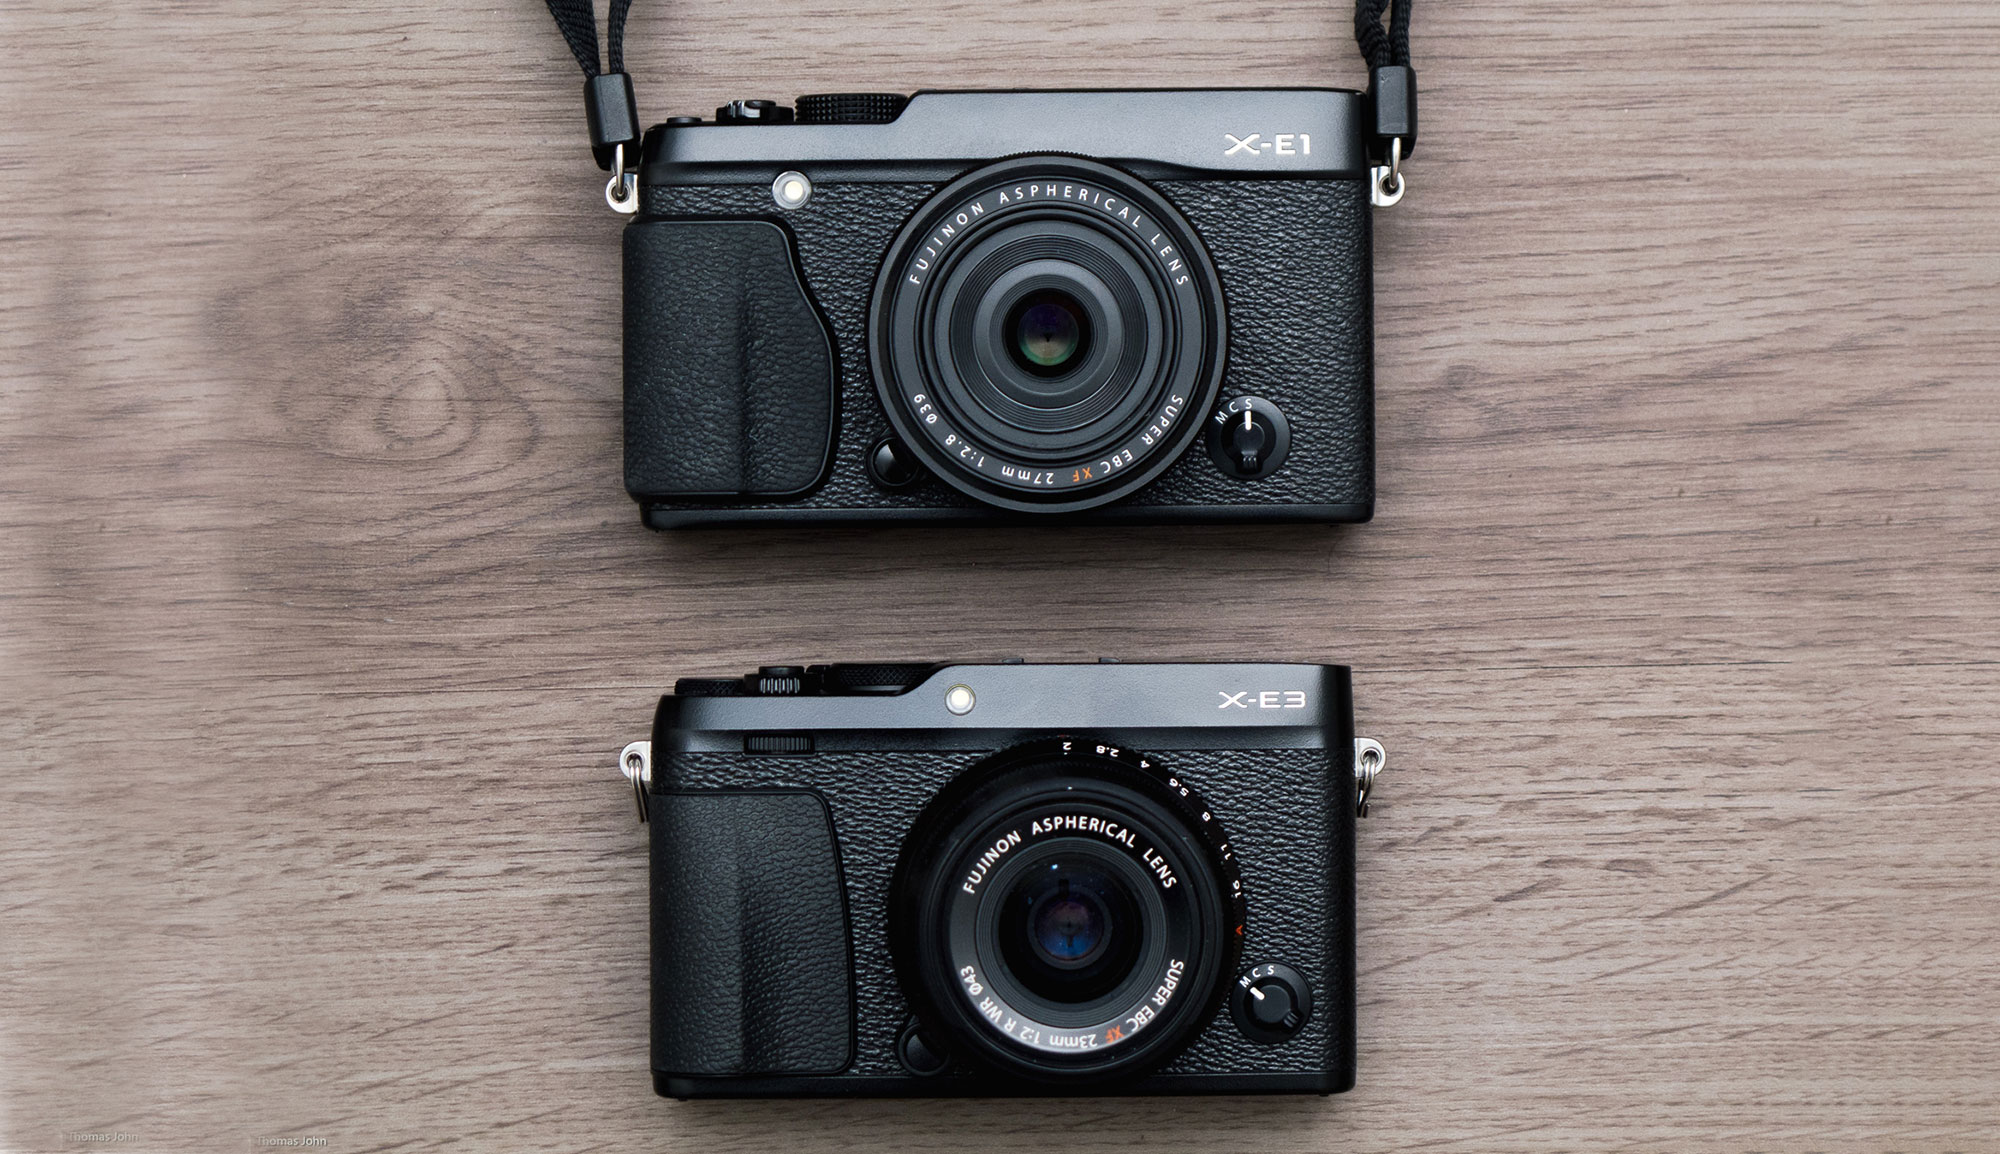 Fuji X-E3 vs X-E1 – Why would you want the newest one?